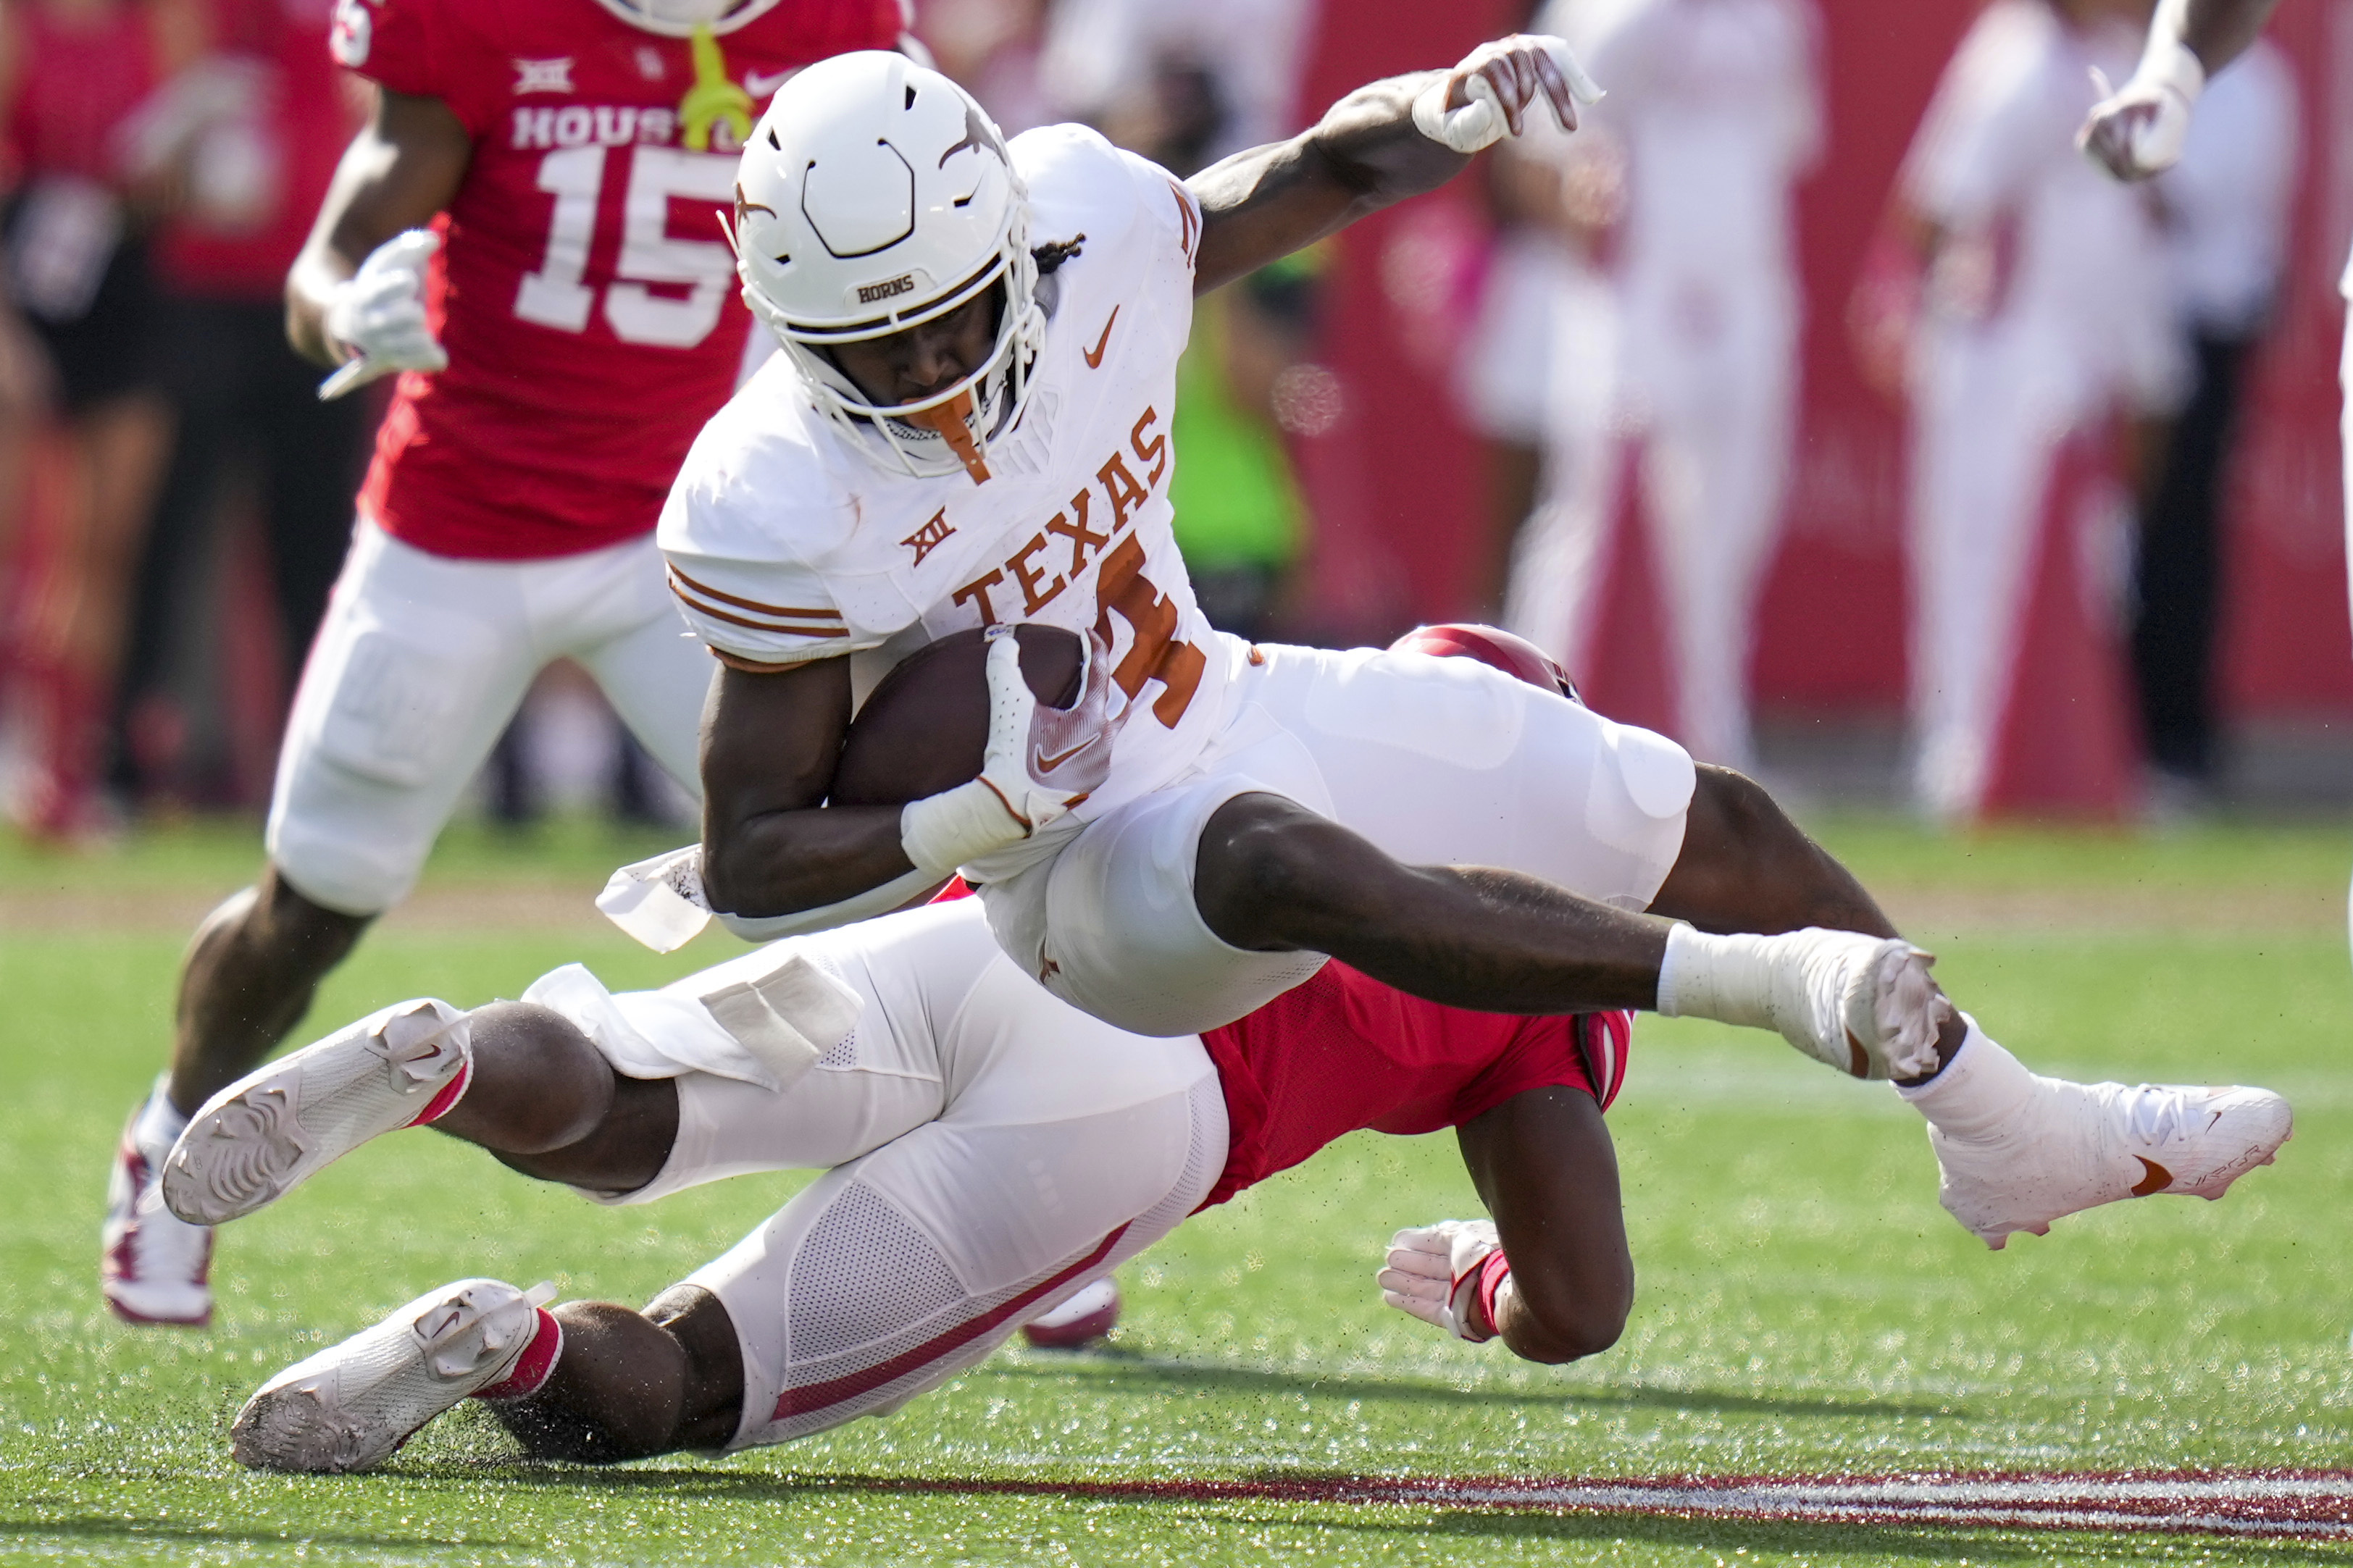 CJ Baxter scores late TD and No. 8 Texas derails Houston's last-chance drive for a 31-24 win